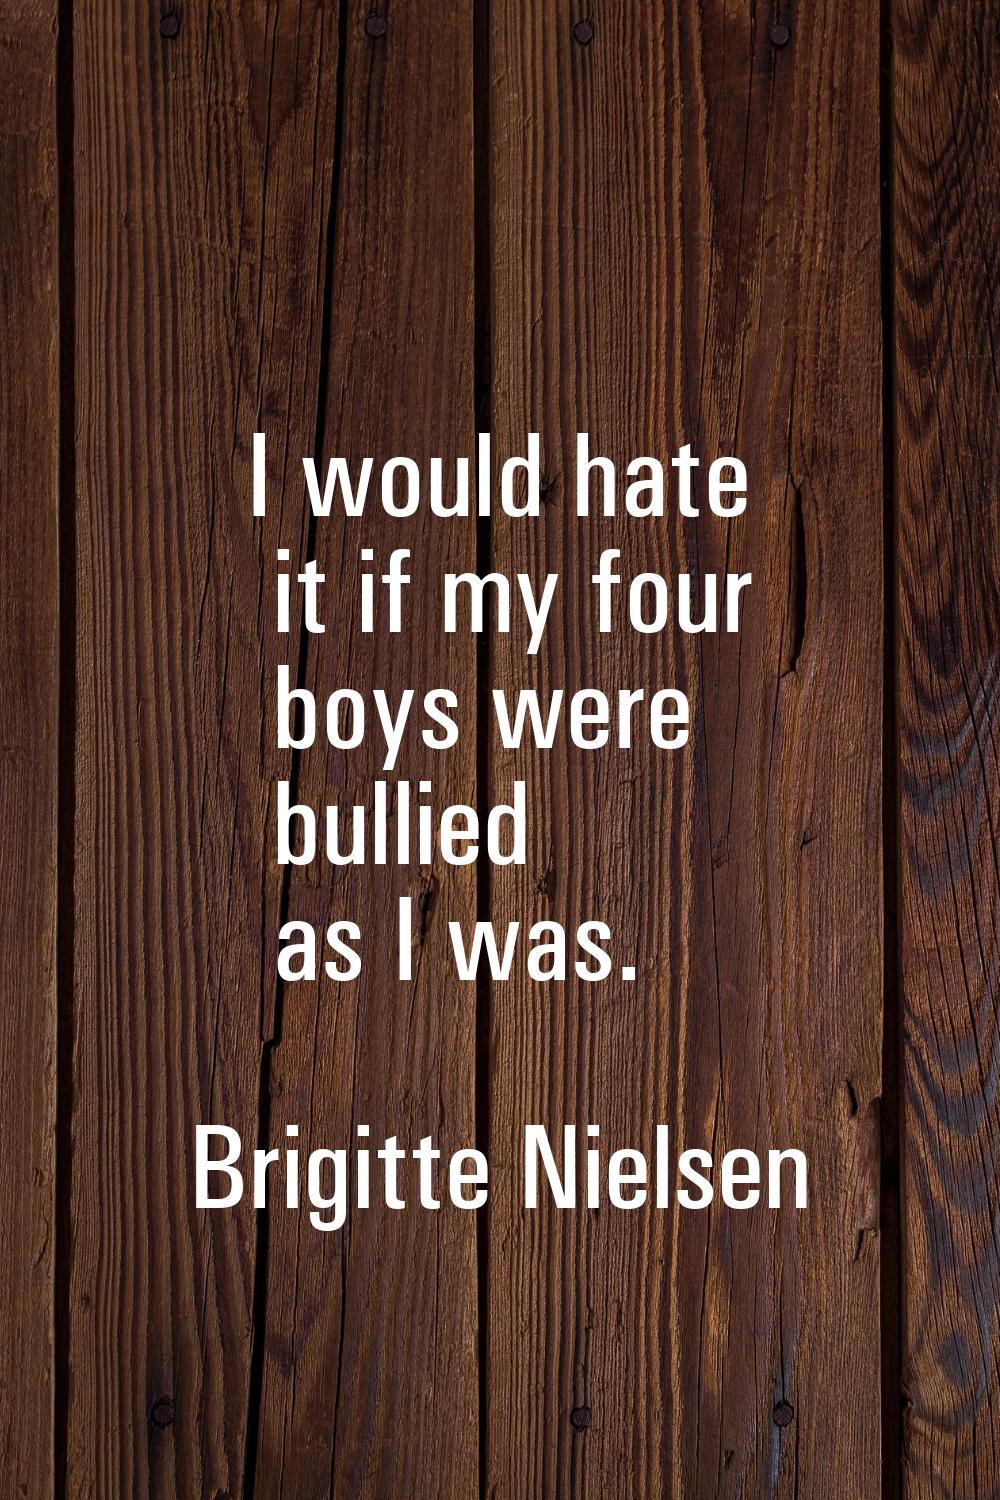 I would hate it if my four boys were bullied as I was.